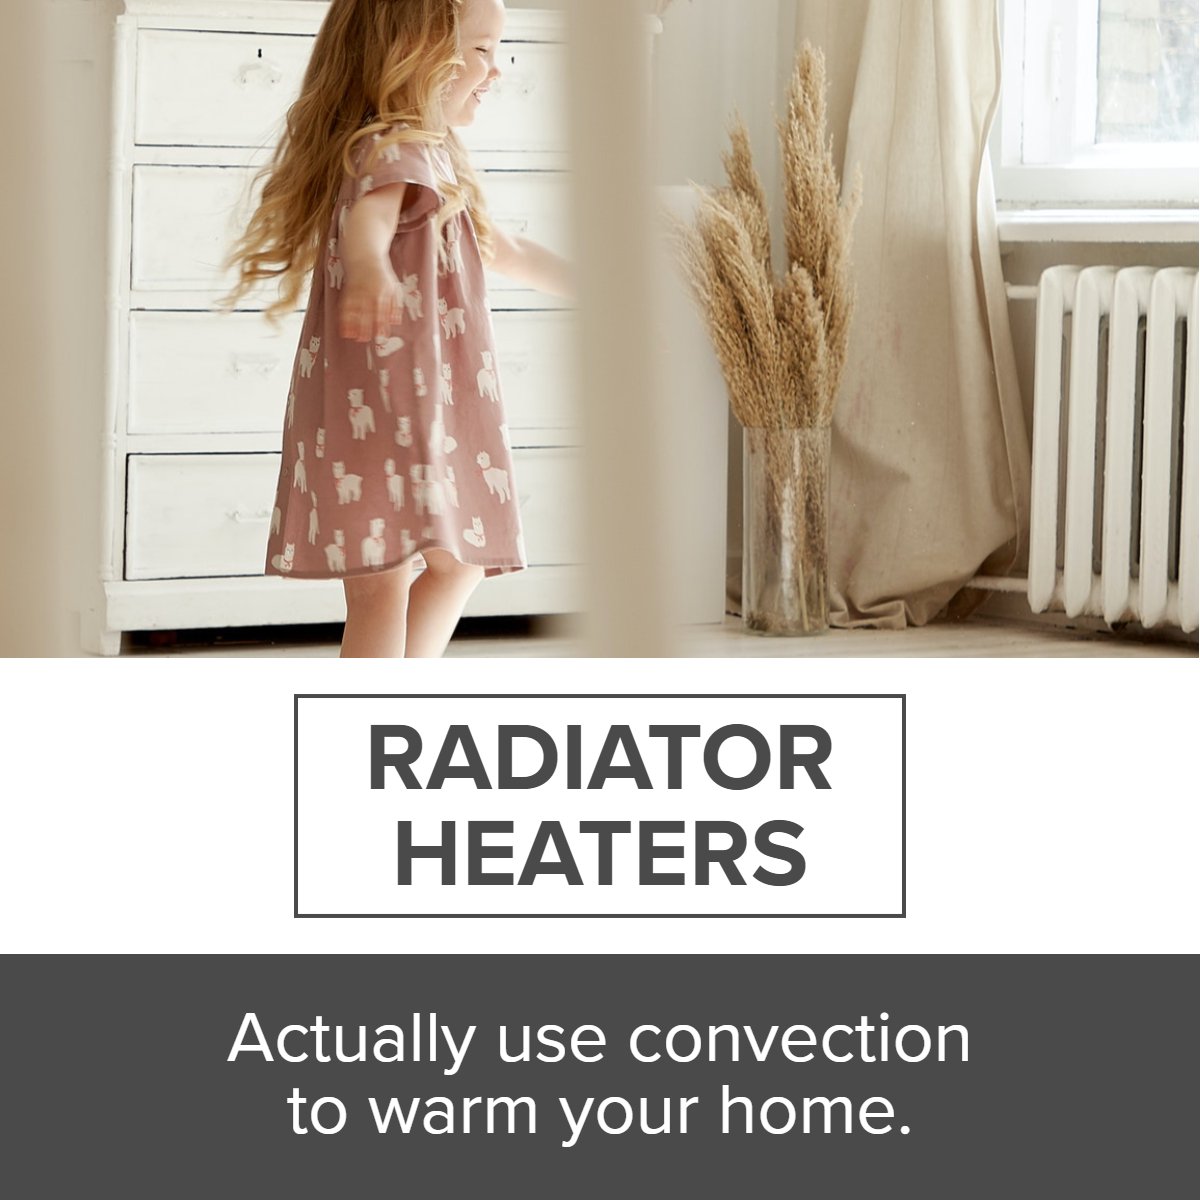 Have you ever wondered how radiator heaters warm your home?

Well... 🤓

#fact    #didyouknow    #factsdaily    #knowledgeispower    #whitehouse    #funfact    #realestate
#Reno #RealEstate #Newhouse #Kitchenreno #FlooringReno #RenoRedo